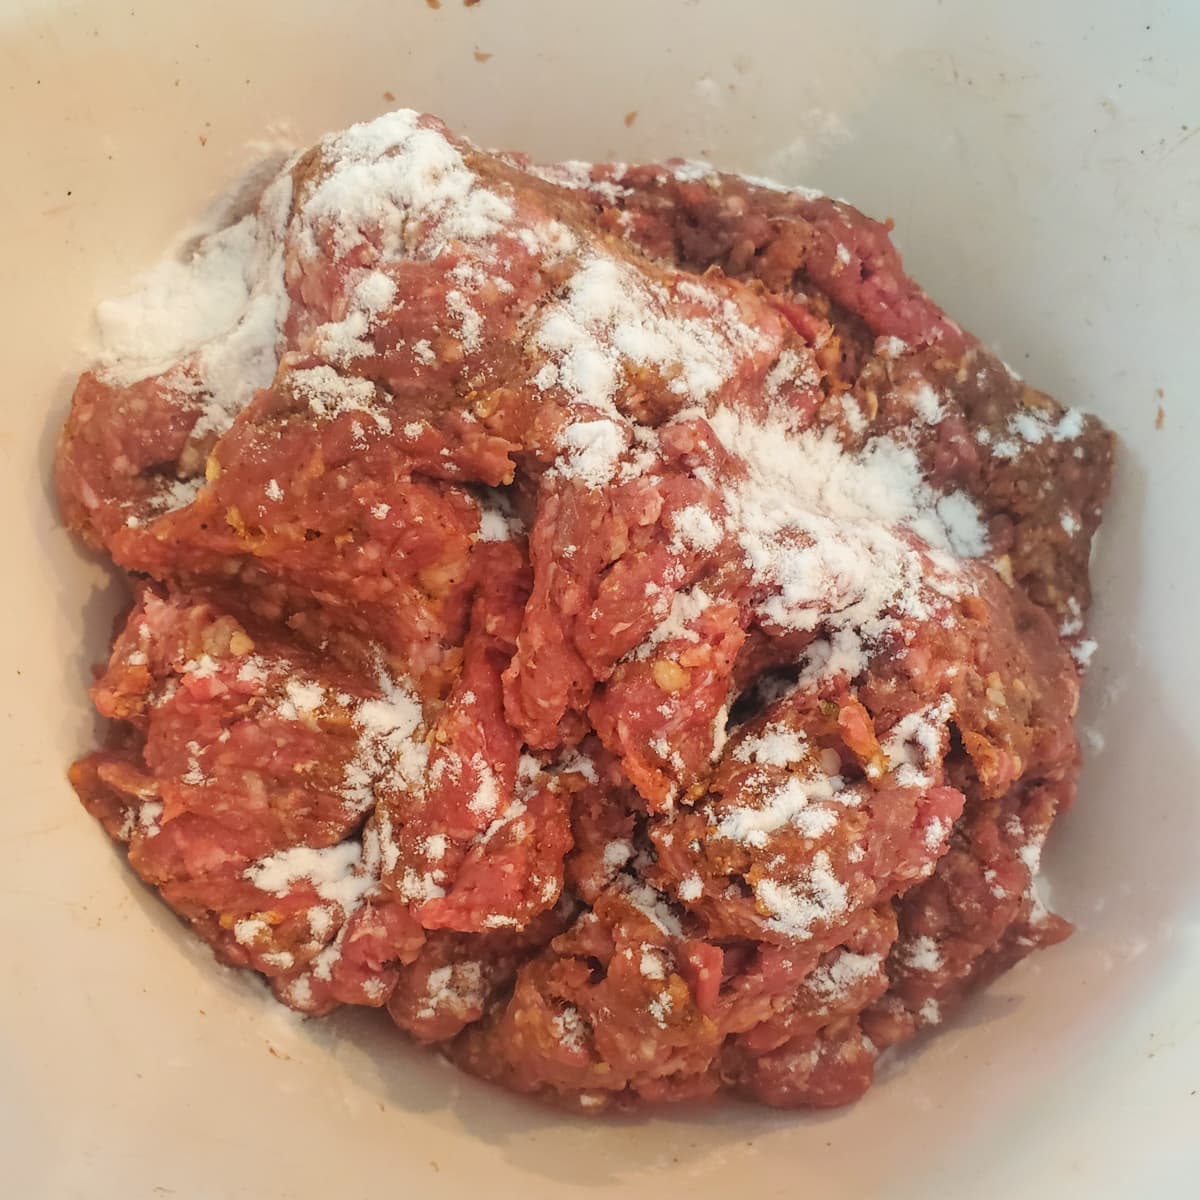 Ground meat for cevapi, dusted with baking soda.